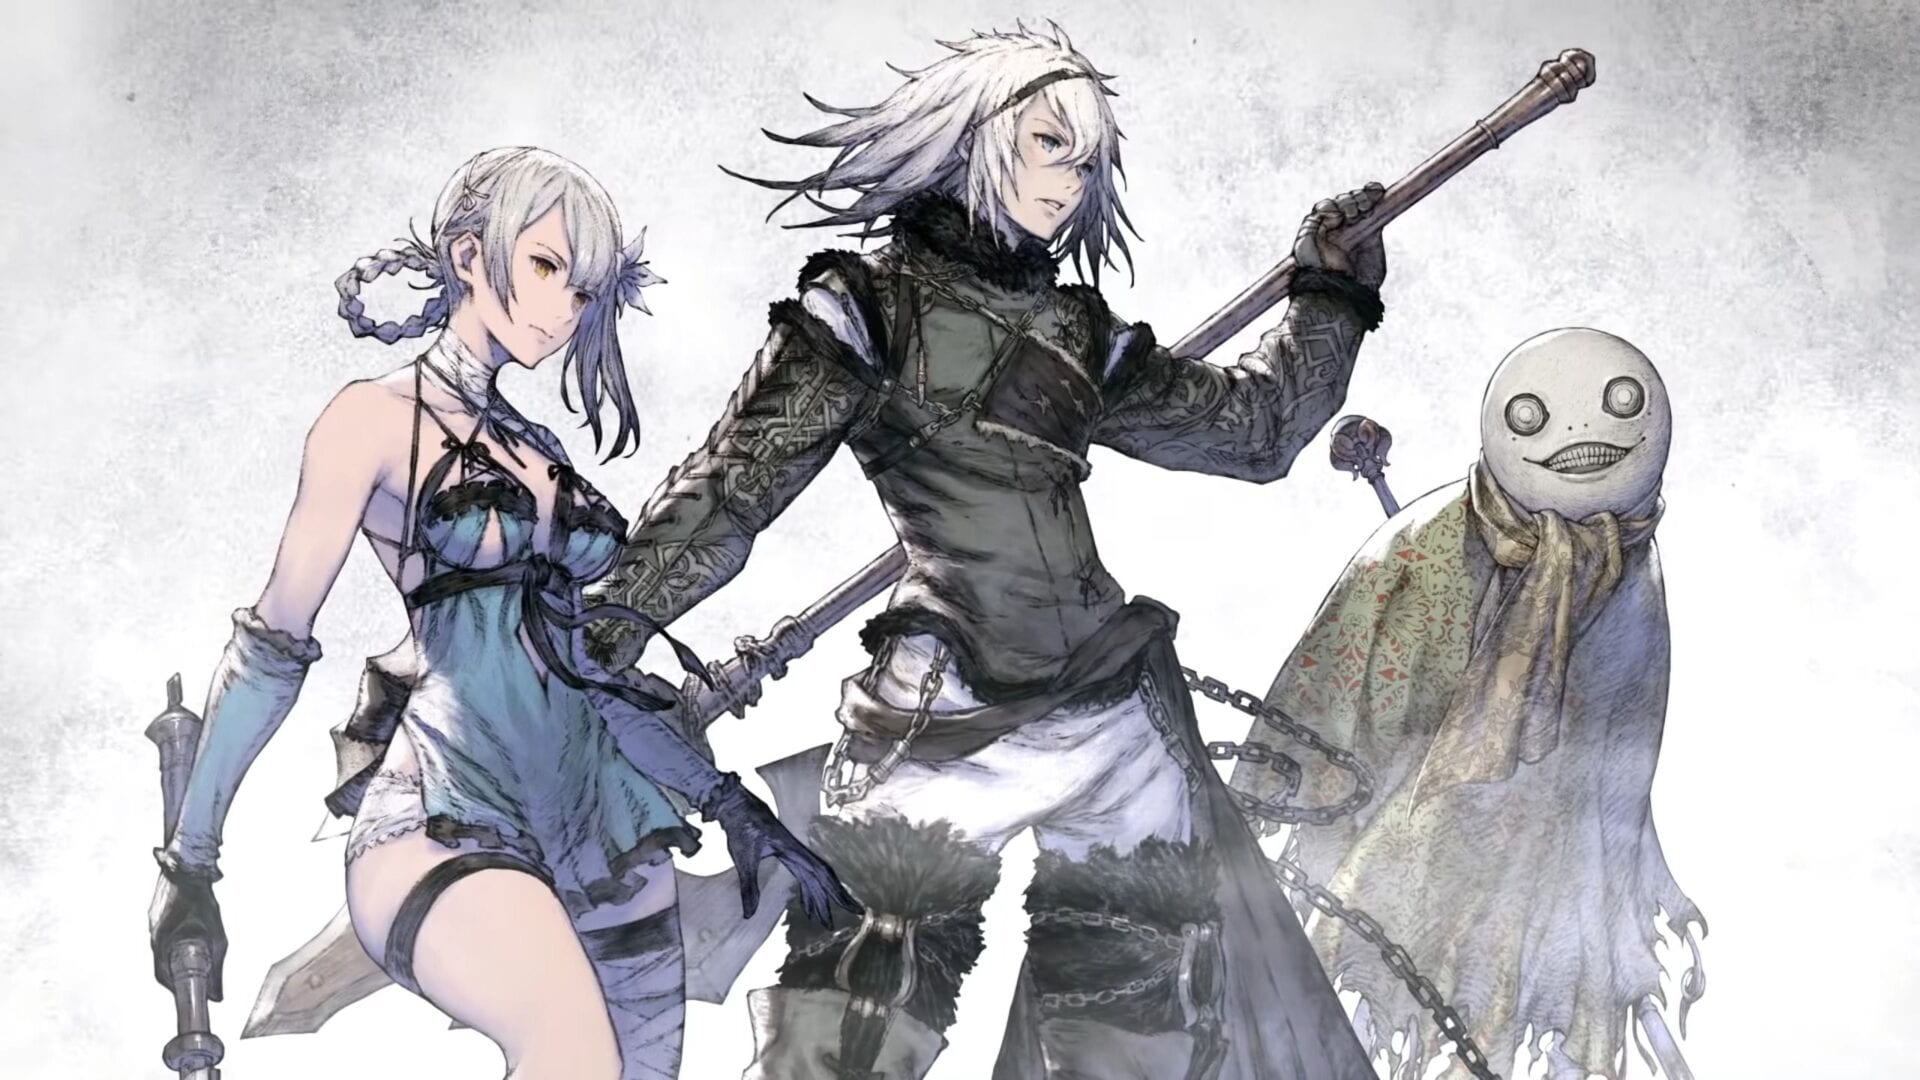 NieR Replicant art featuring Kaine, Nier and Emil